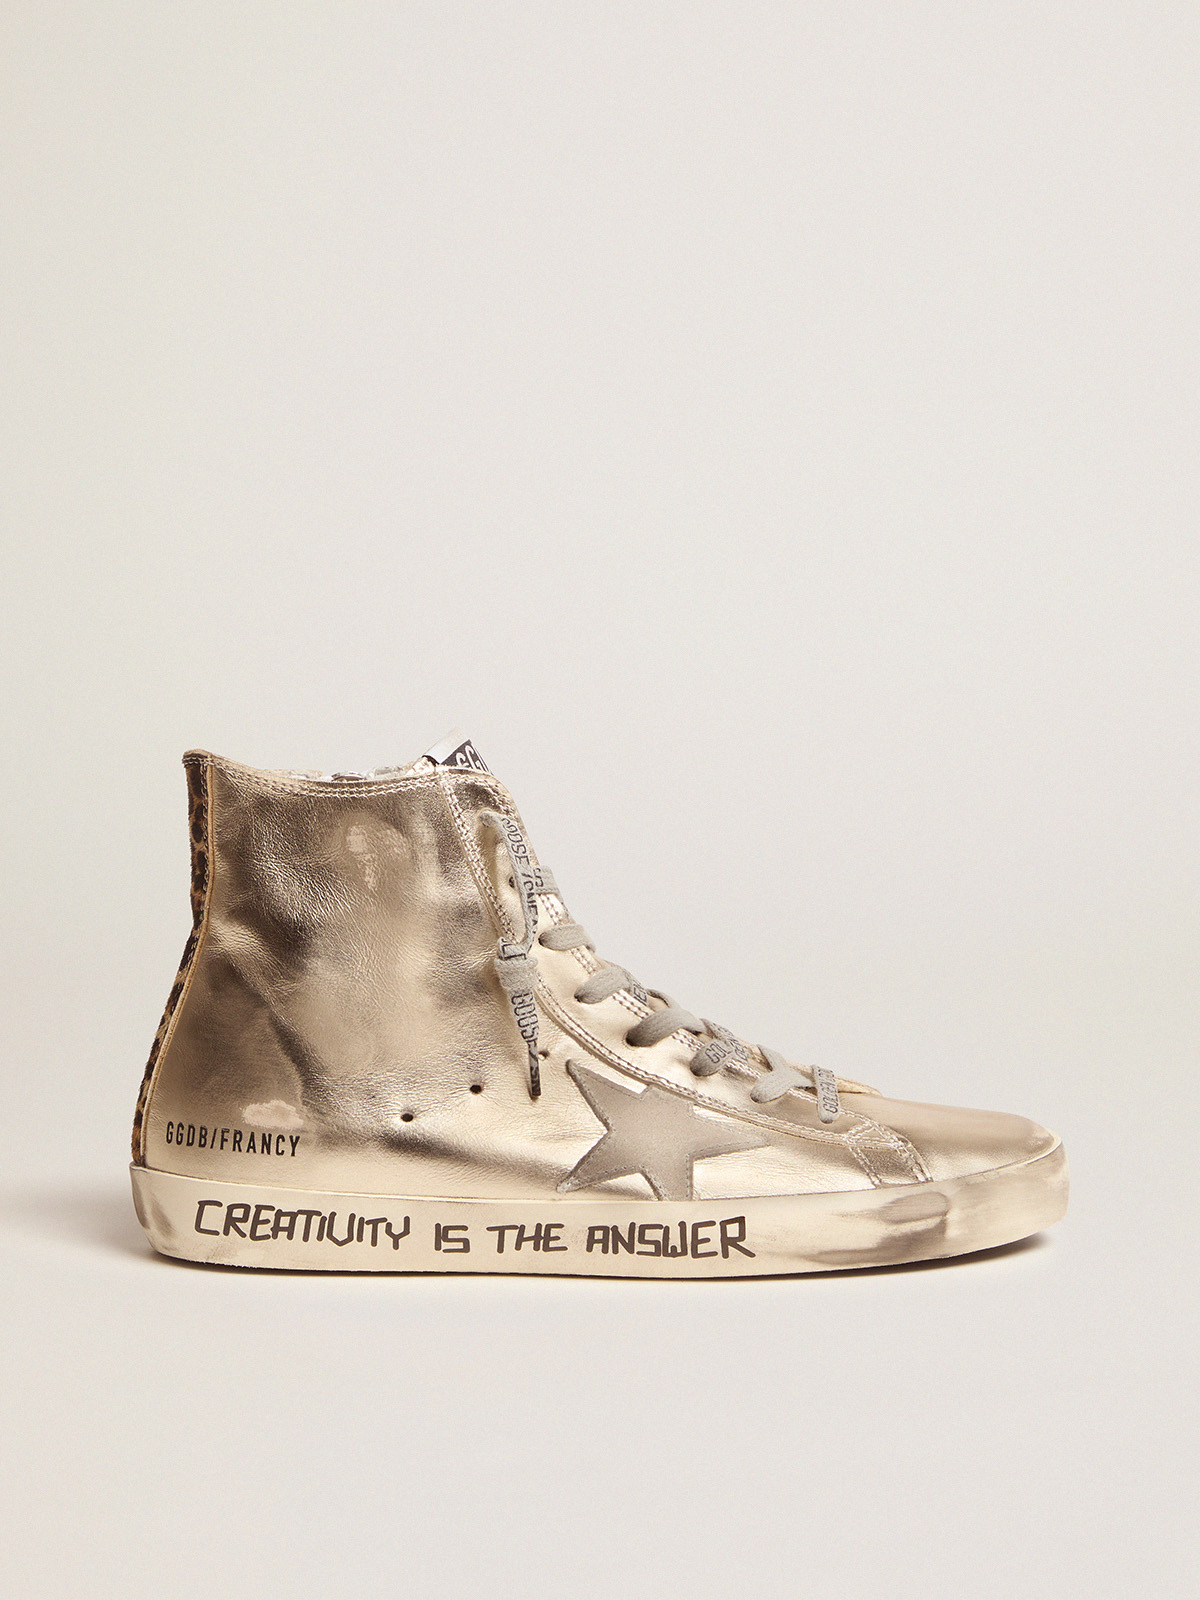 Gold Francy sneakers with handwritten lettering and leopard print